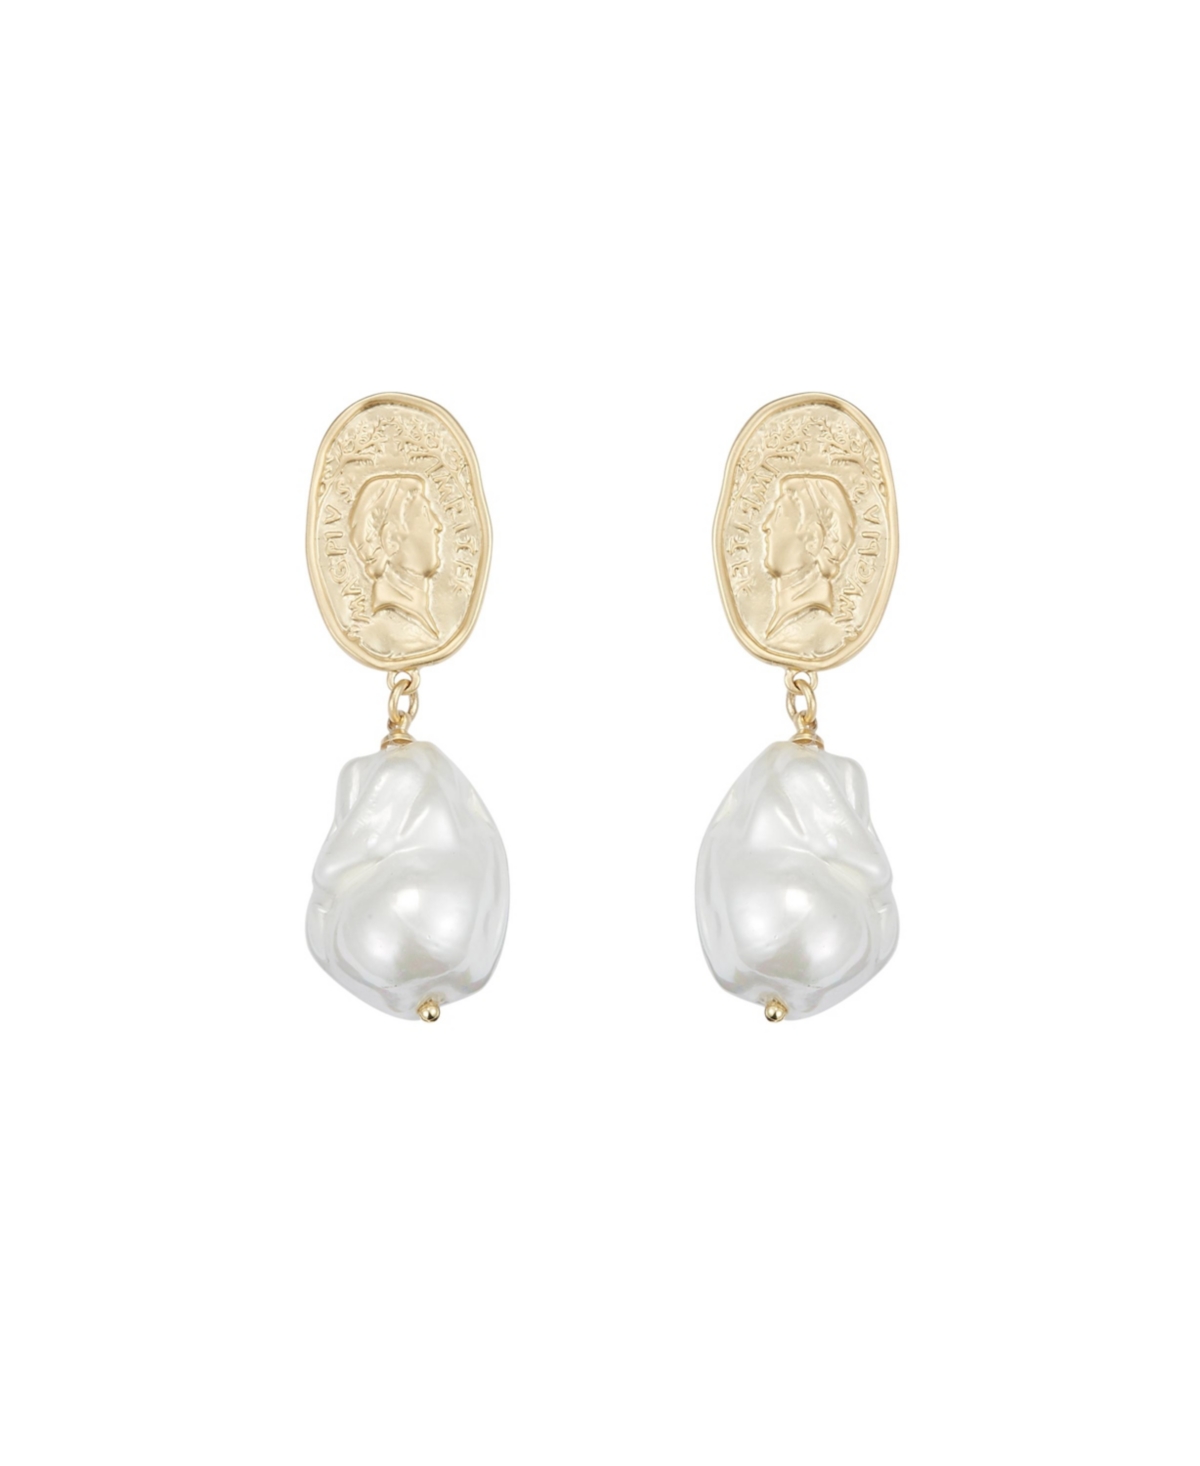 Matted Gold Sculpted Oversized Baroque Pearl Drop Earrings - Gold